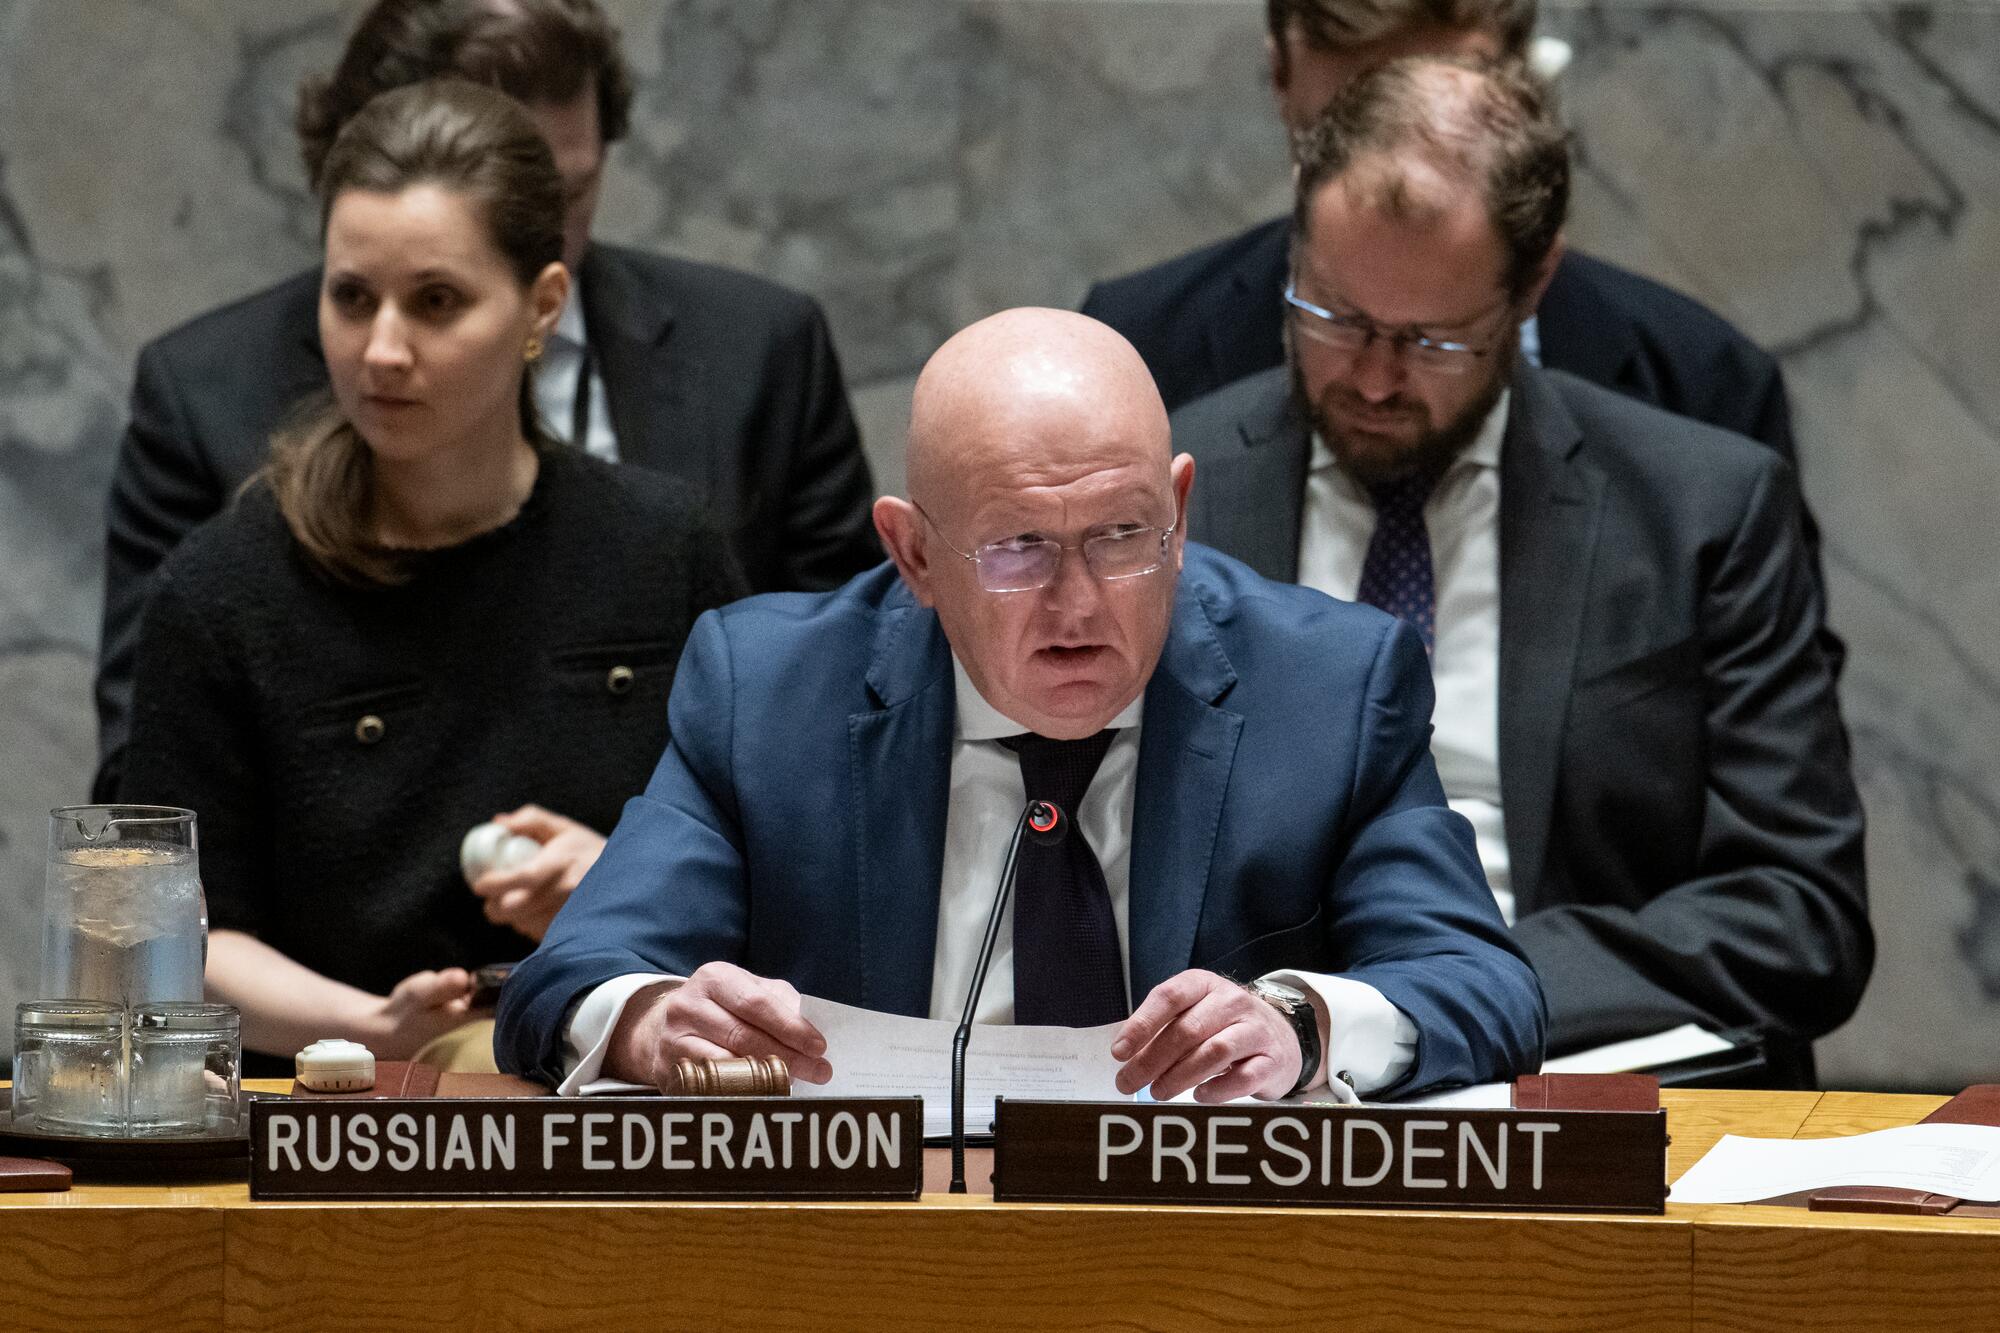 Vassily Nebenzia, Permanent Representative of the Russian Federation and President of the Security Council for the month of July, chairs the Security Council meeting on the situation in the Middle East, including the Palestinian question.